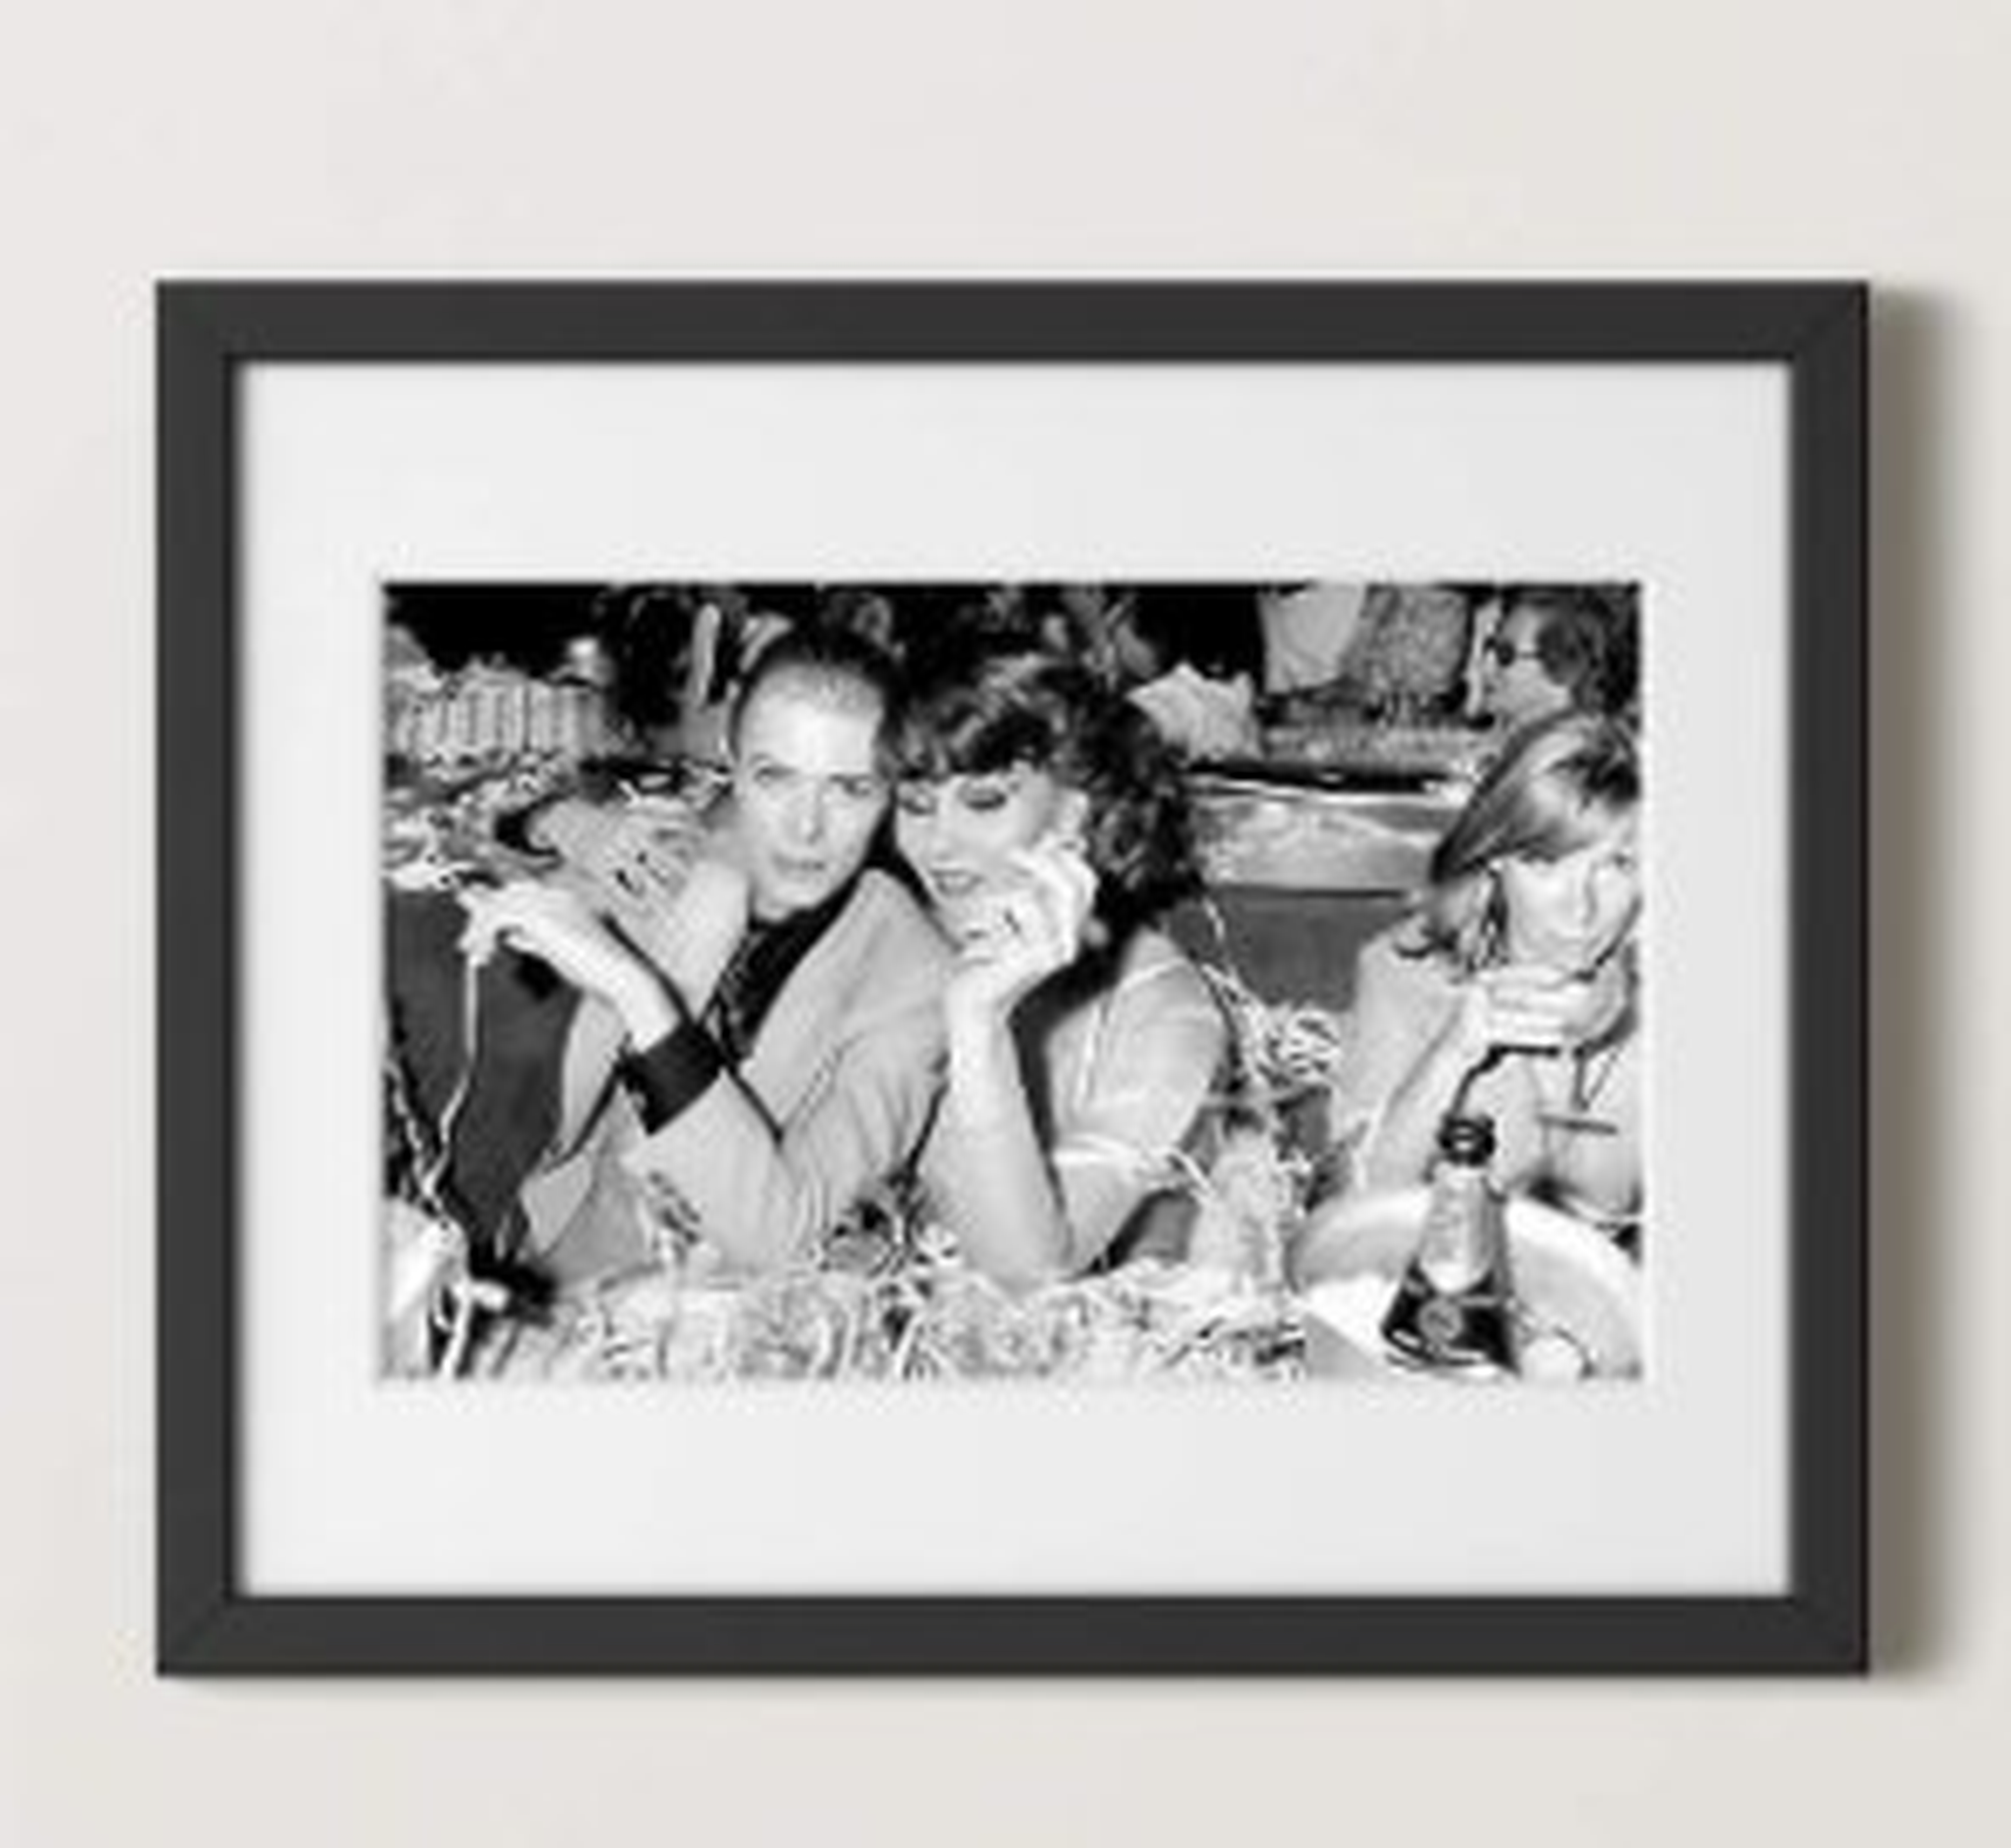 'David Bowie and Romy Haag' Photographic Print in Black Frame 21.5"x17.5" - CB2